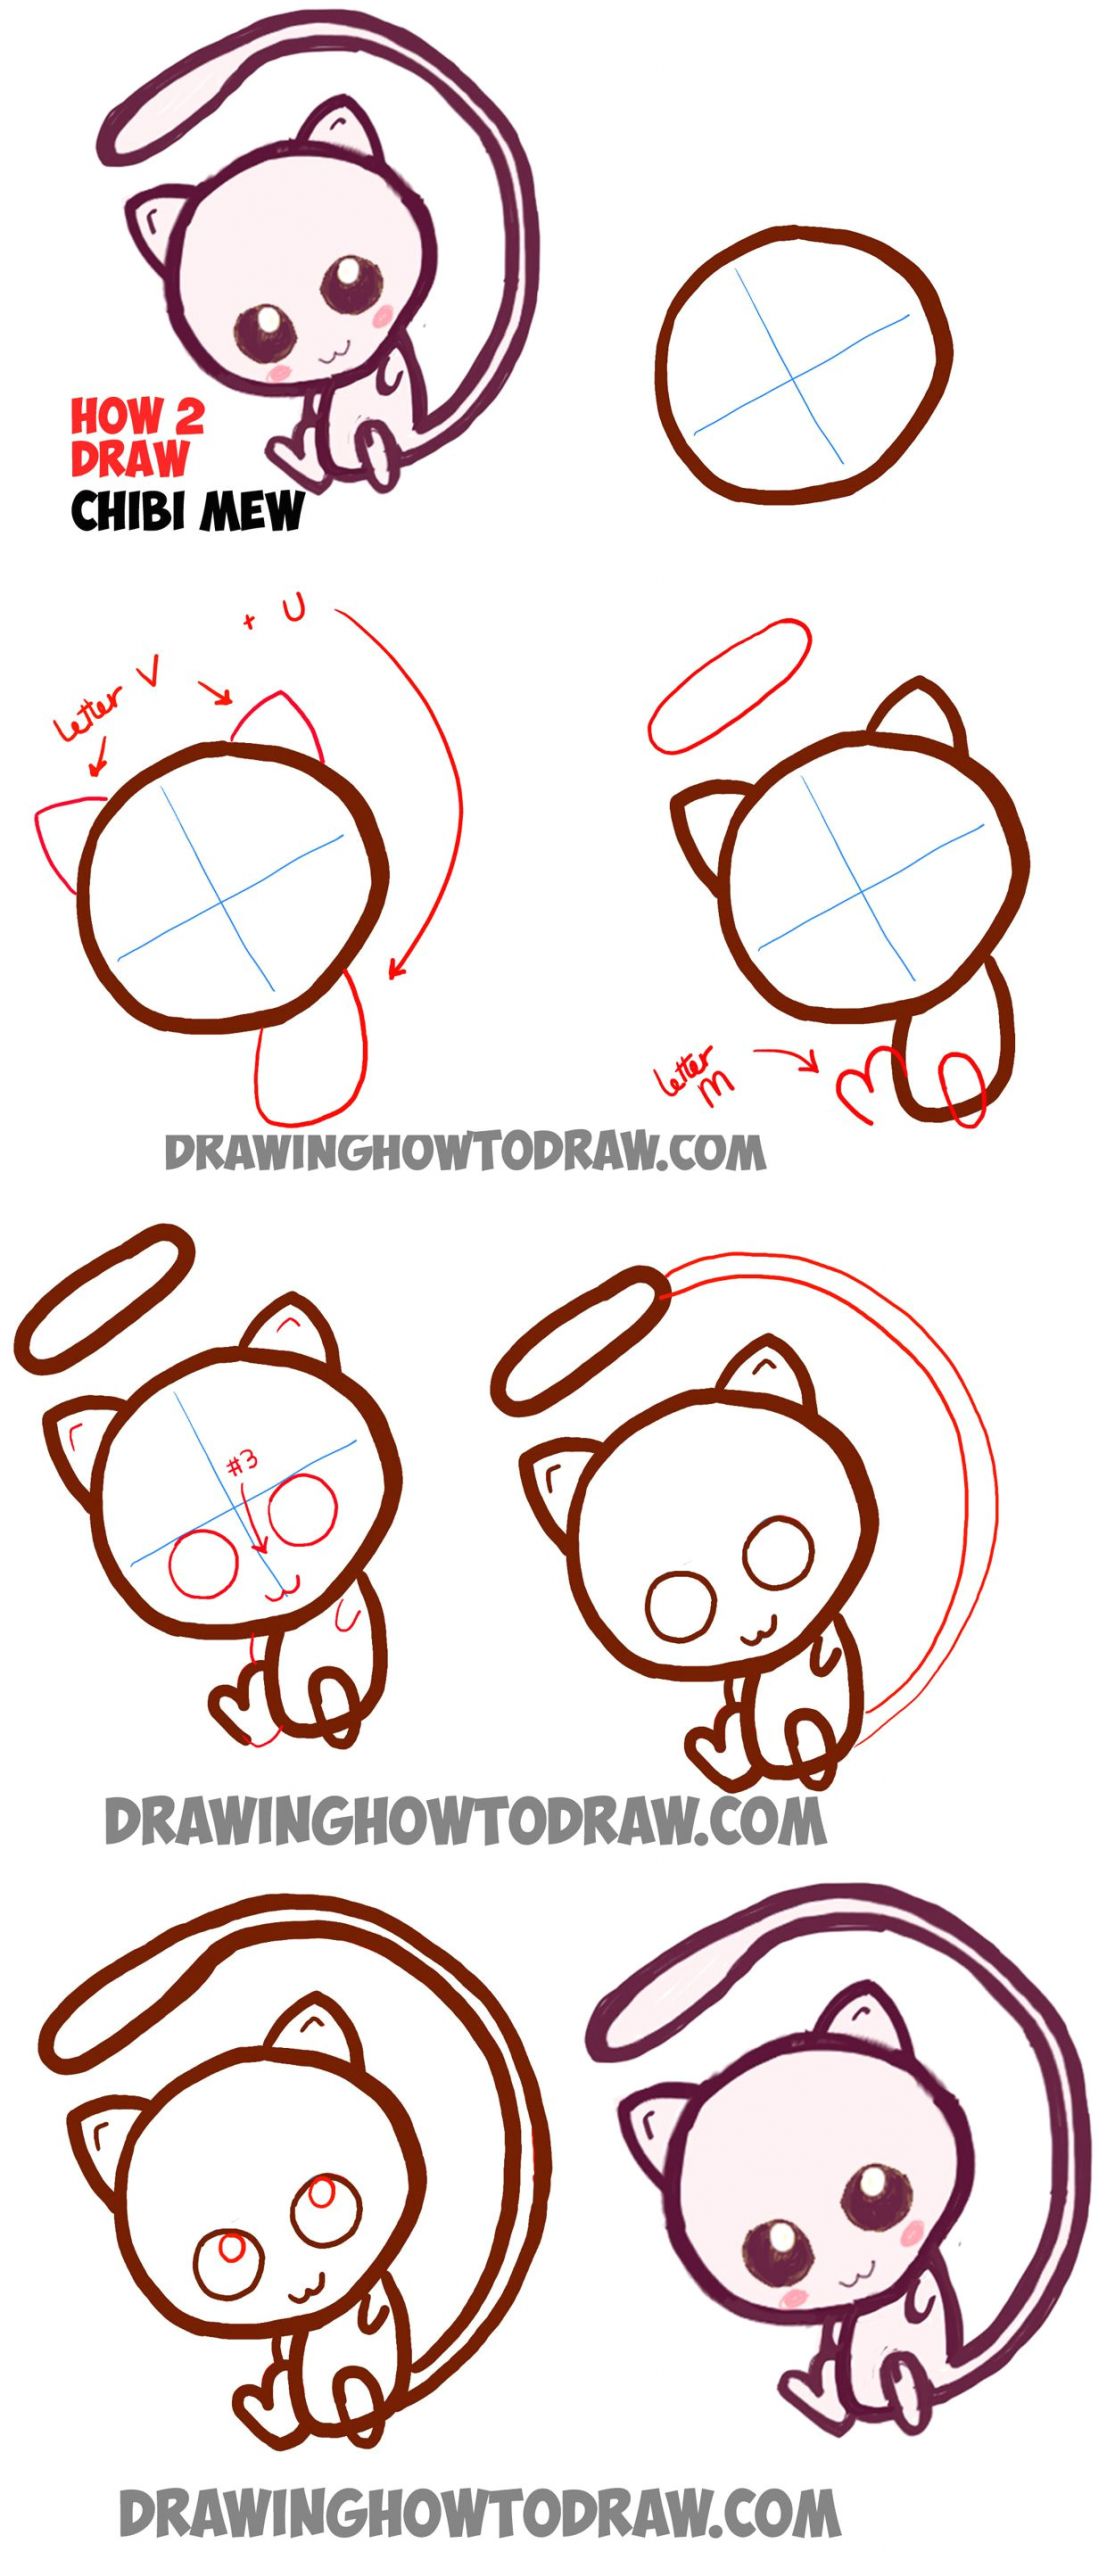 Yak Drawing Easy How to Draw Cute Baby Chibi Mew From Pokemon Easy Step by